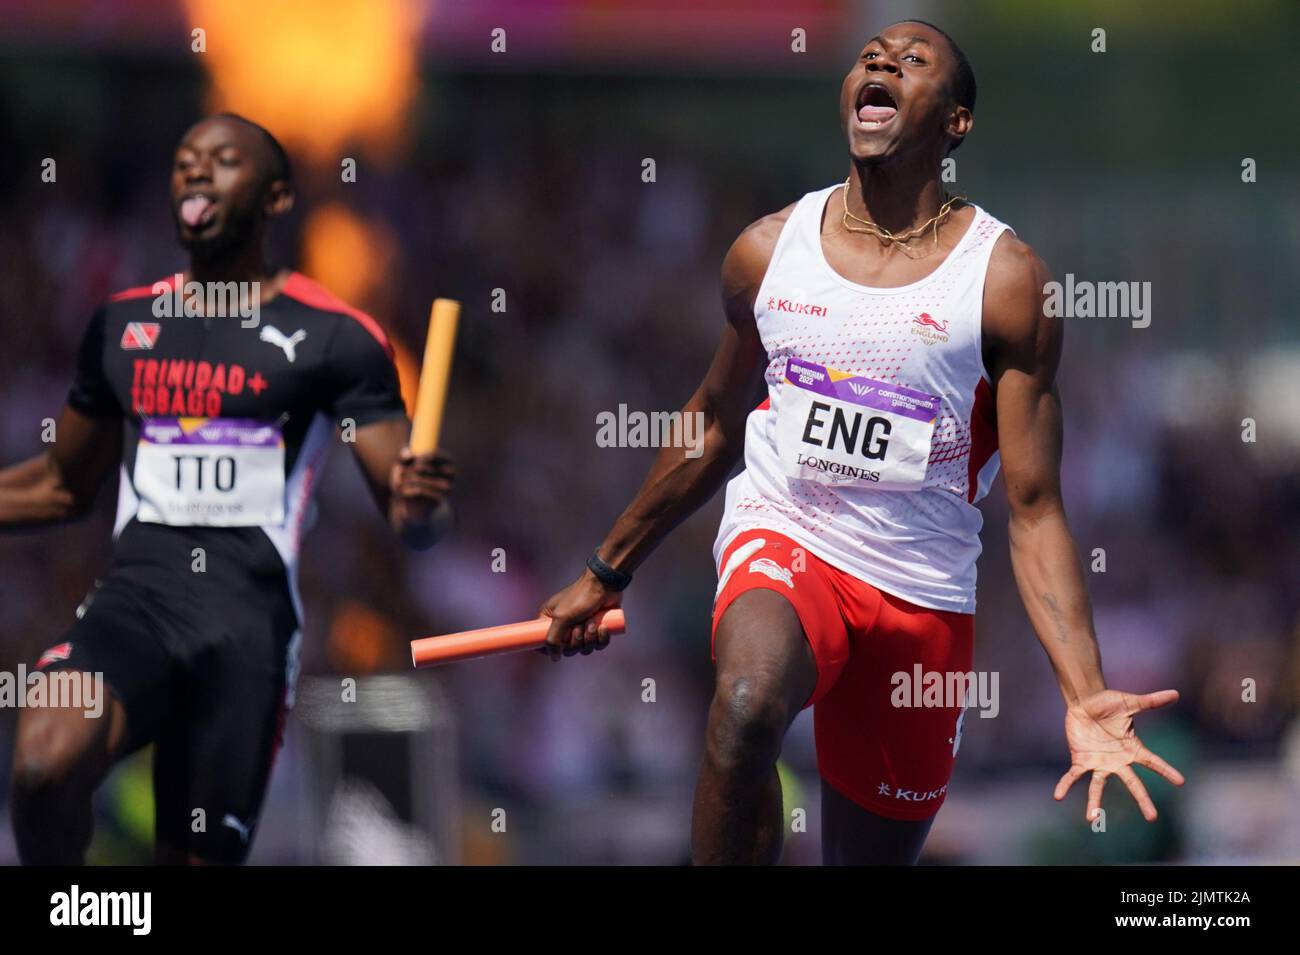 England's Ojie Edoburun (right) celebrates after winning gold in Men's 4 x 100m Relay - Final at Alexander Stadium on day ten of the 2022 Commonwealth Games in Birmingham. Picture date: Sunday August 7, 2022. See PA story COMMONWEALTH Athletics. Photo credit should read: Jacob King/PA Wire. RESTRICTIONS: Use subject to restrictions. Editorial use only, no commercial use without prior consent from rights holder. Stock Photo